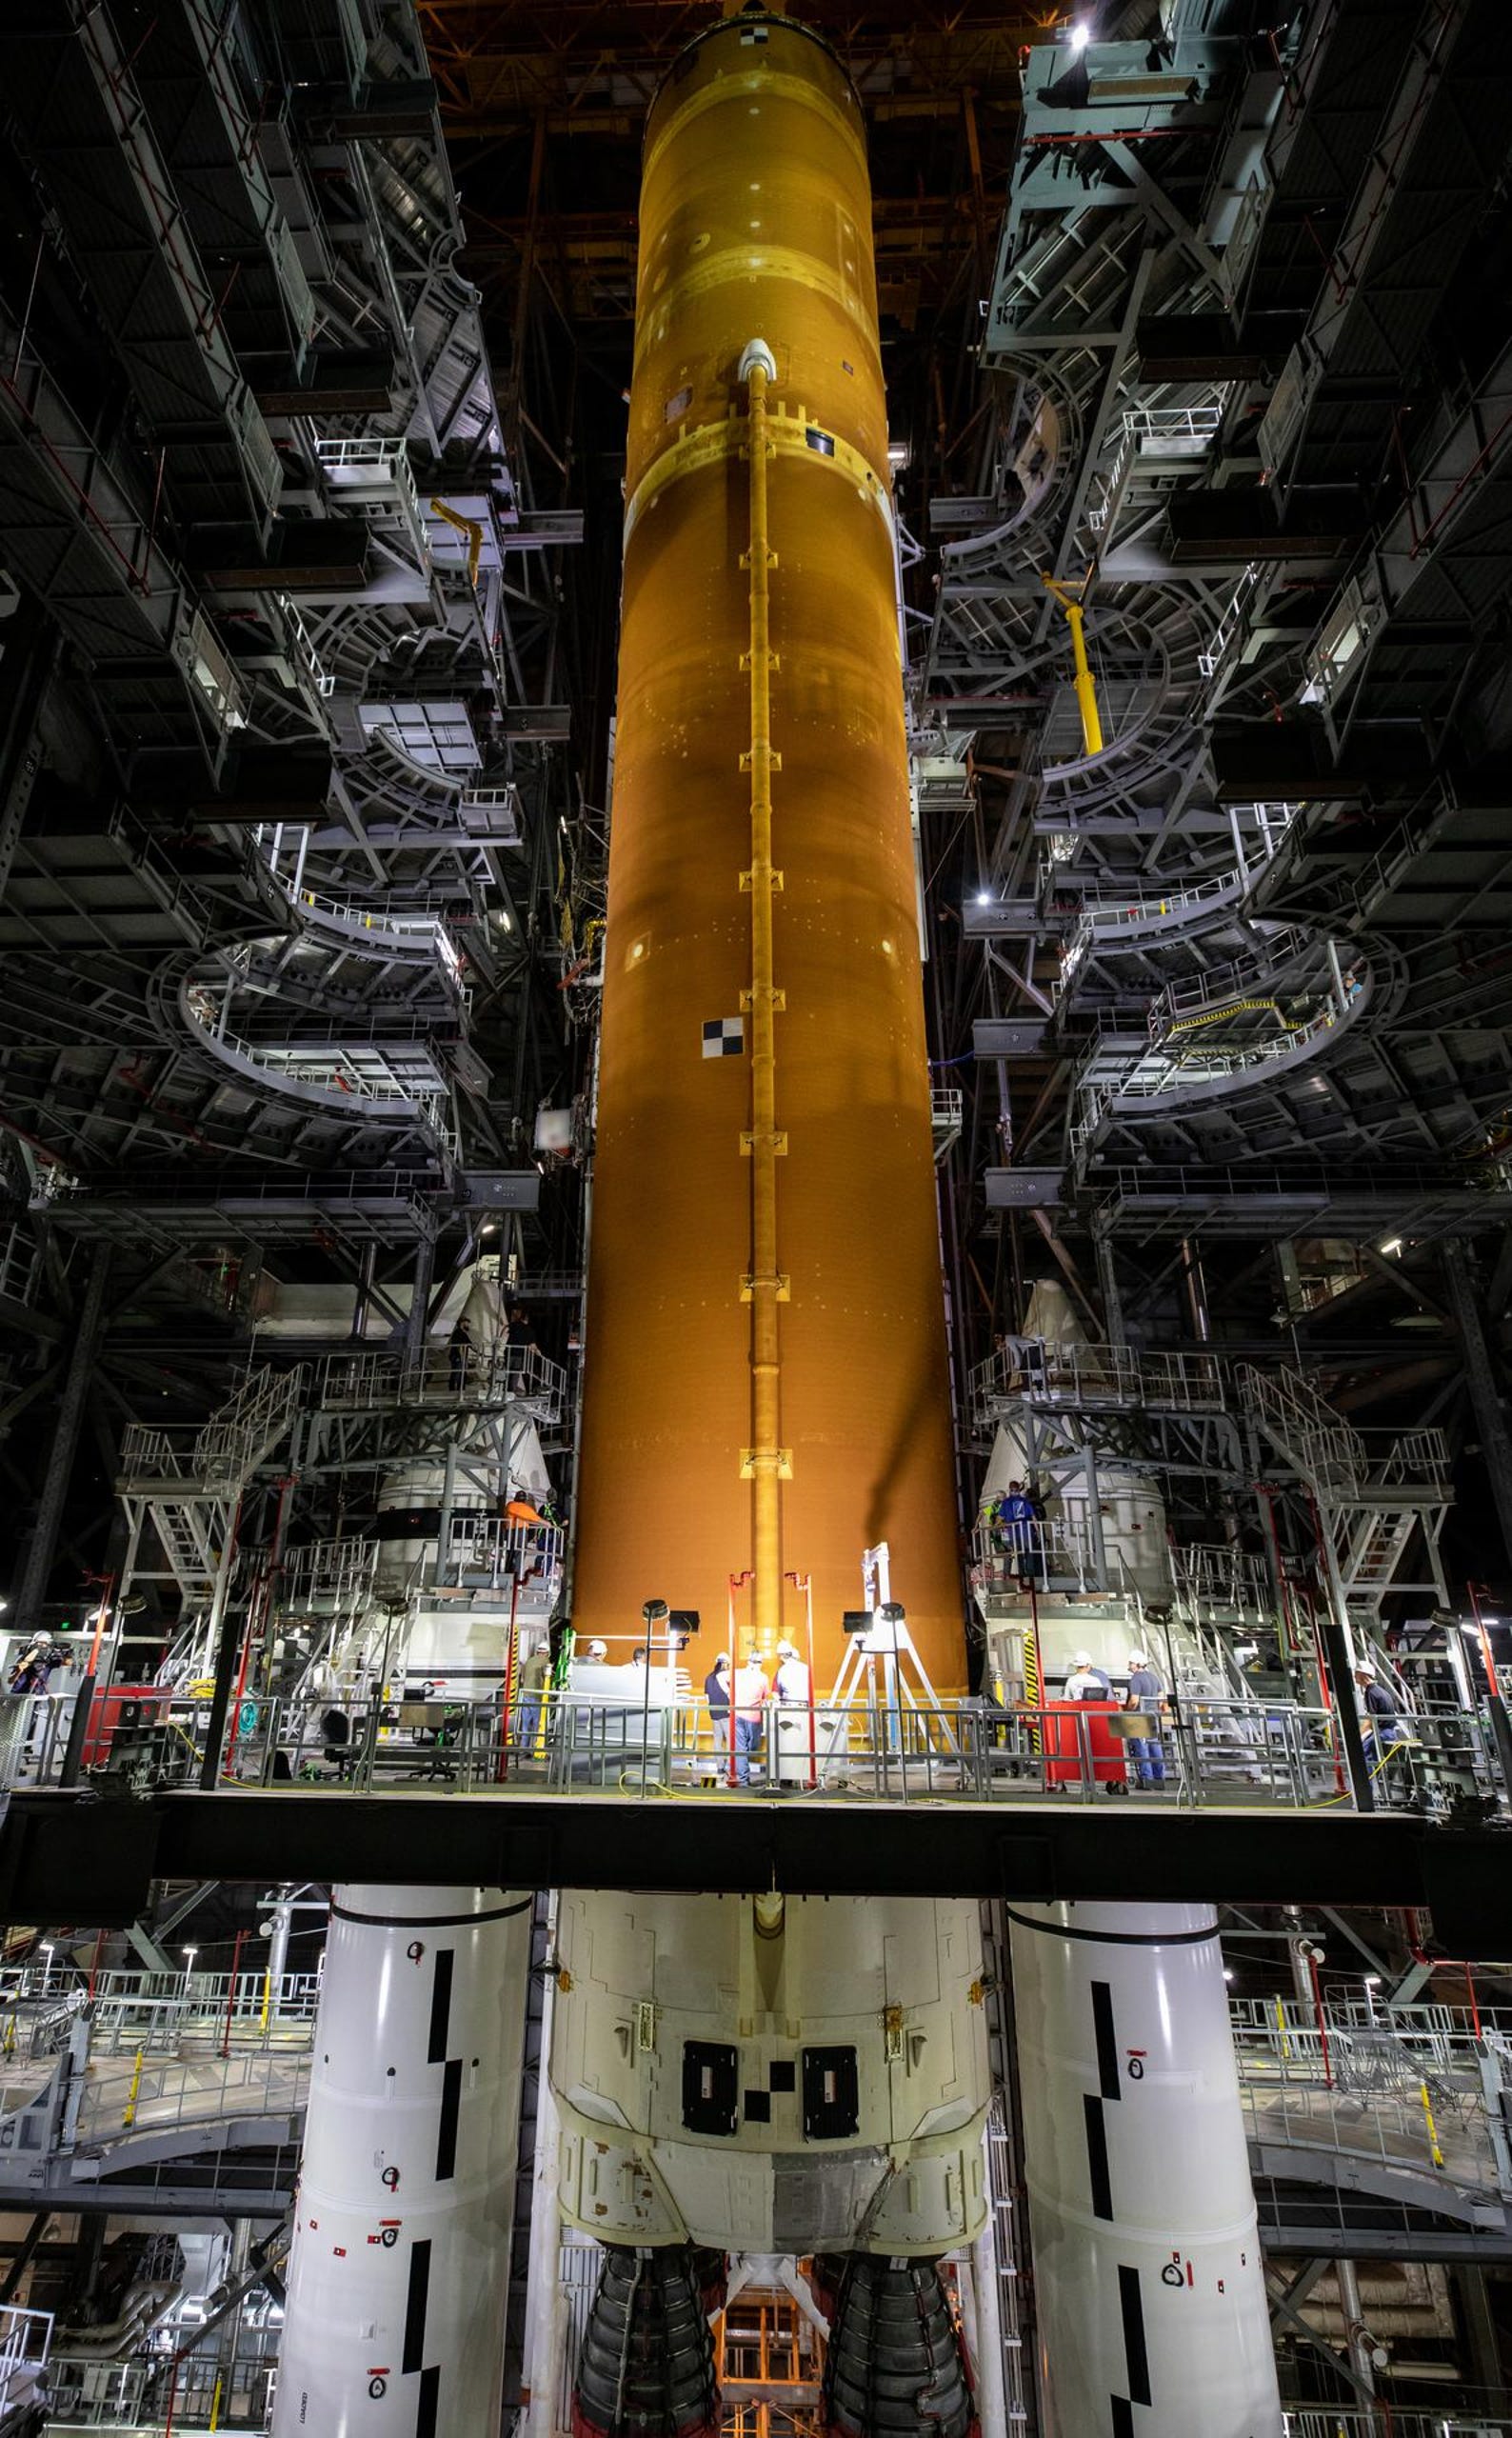 Teams with NASA’s Exploration Ground Systems and contractor Jacobs lower the Space Launch System (SLS) core stage – the largest part of the rocket – onto the mobile launcher, in between the twin solid rocket boosters, inside the Vehicle Assembly Building at NASA’s Kennedy Space Center in Florida on June 12, 2021.